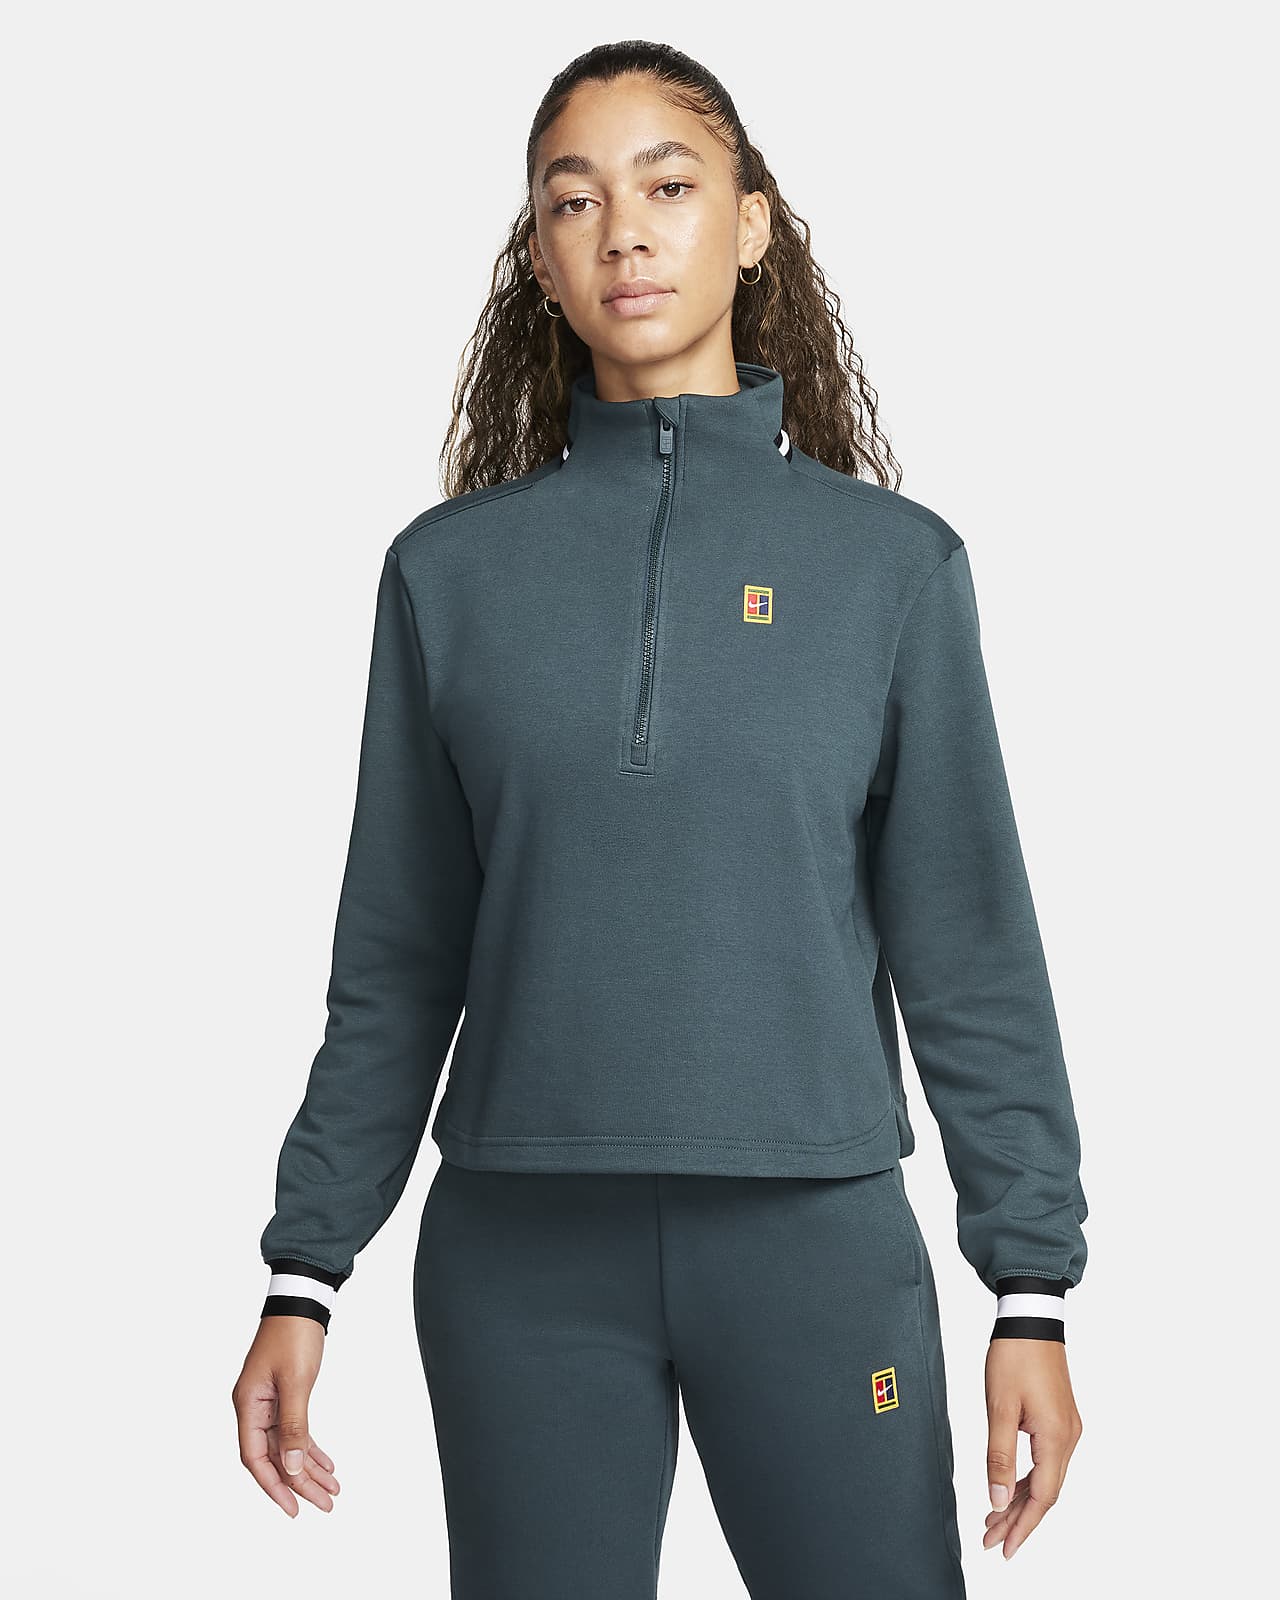 https://static.nike.com/a/images/t_PDP_1280_v1/f_auto,q_auto:eco/bc7172dd-1e79-4e8d-95b5-8e7e16a9ea81/nikecourt-dri-fit-heritage-french-terry-tennis-top-Qc2vkn.png